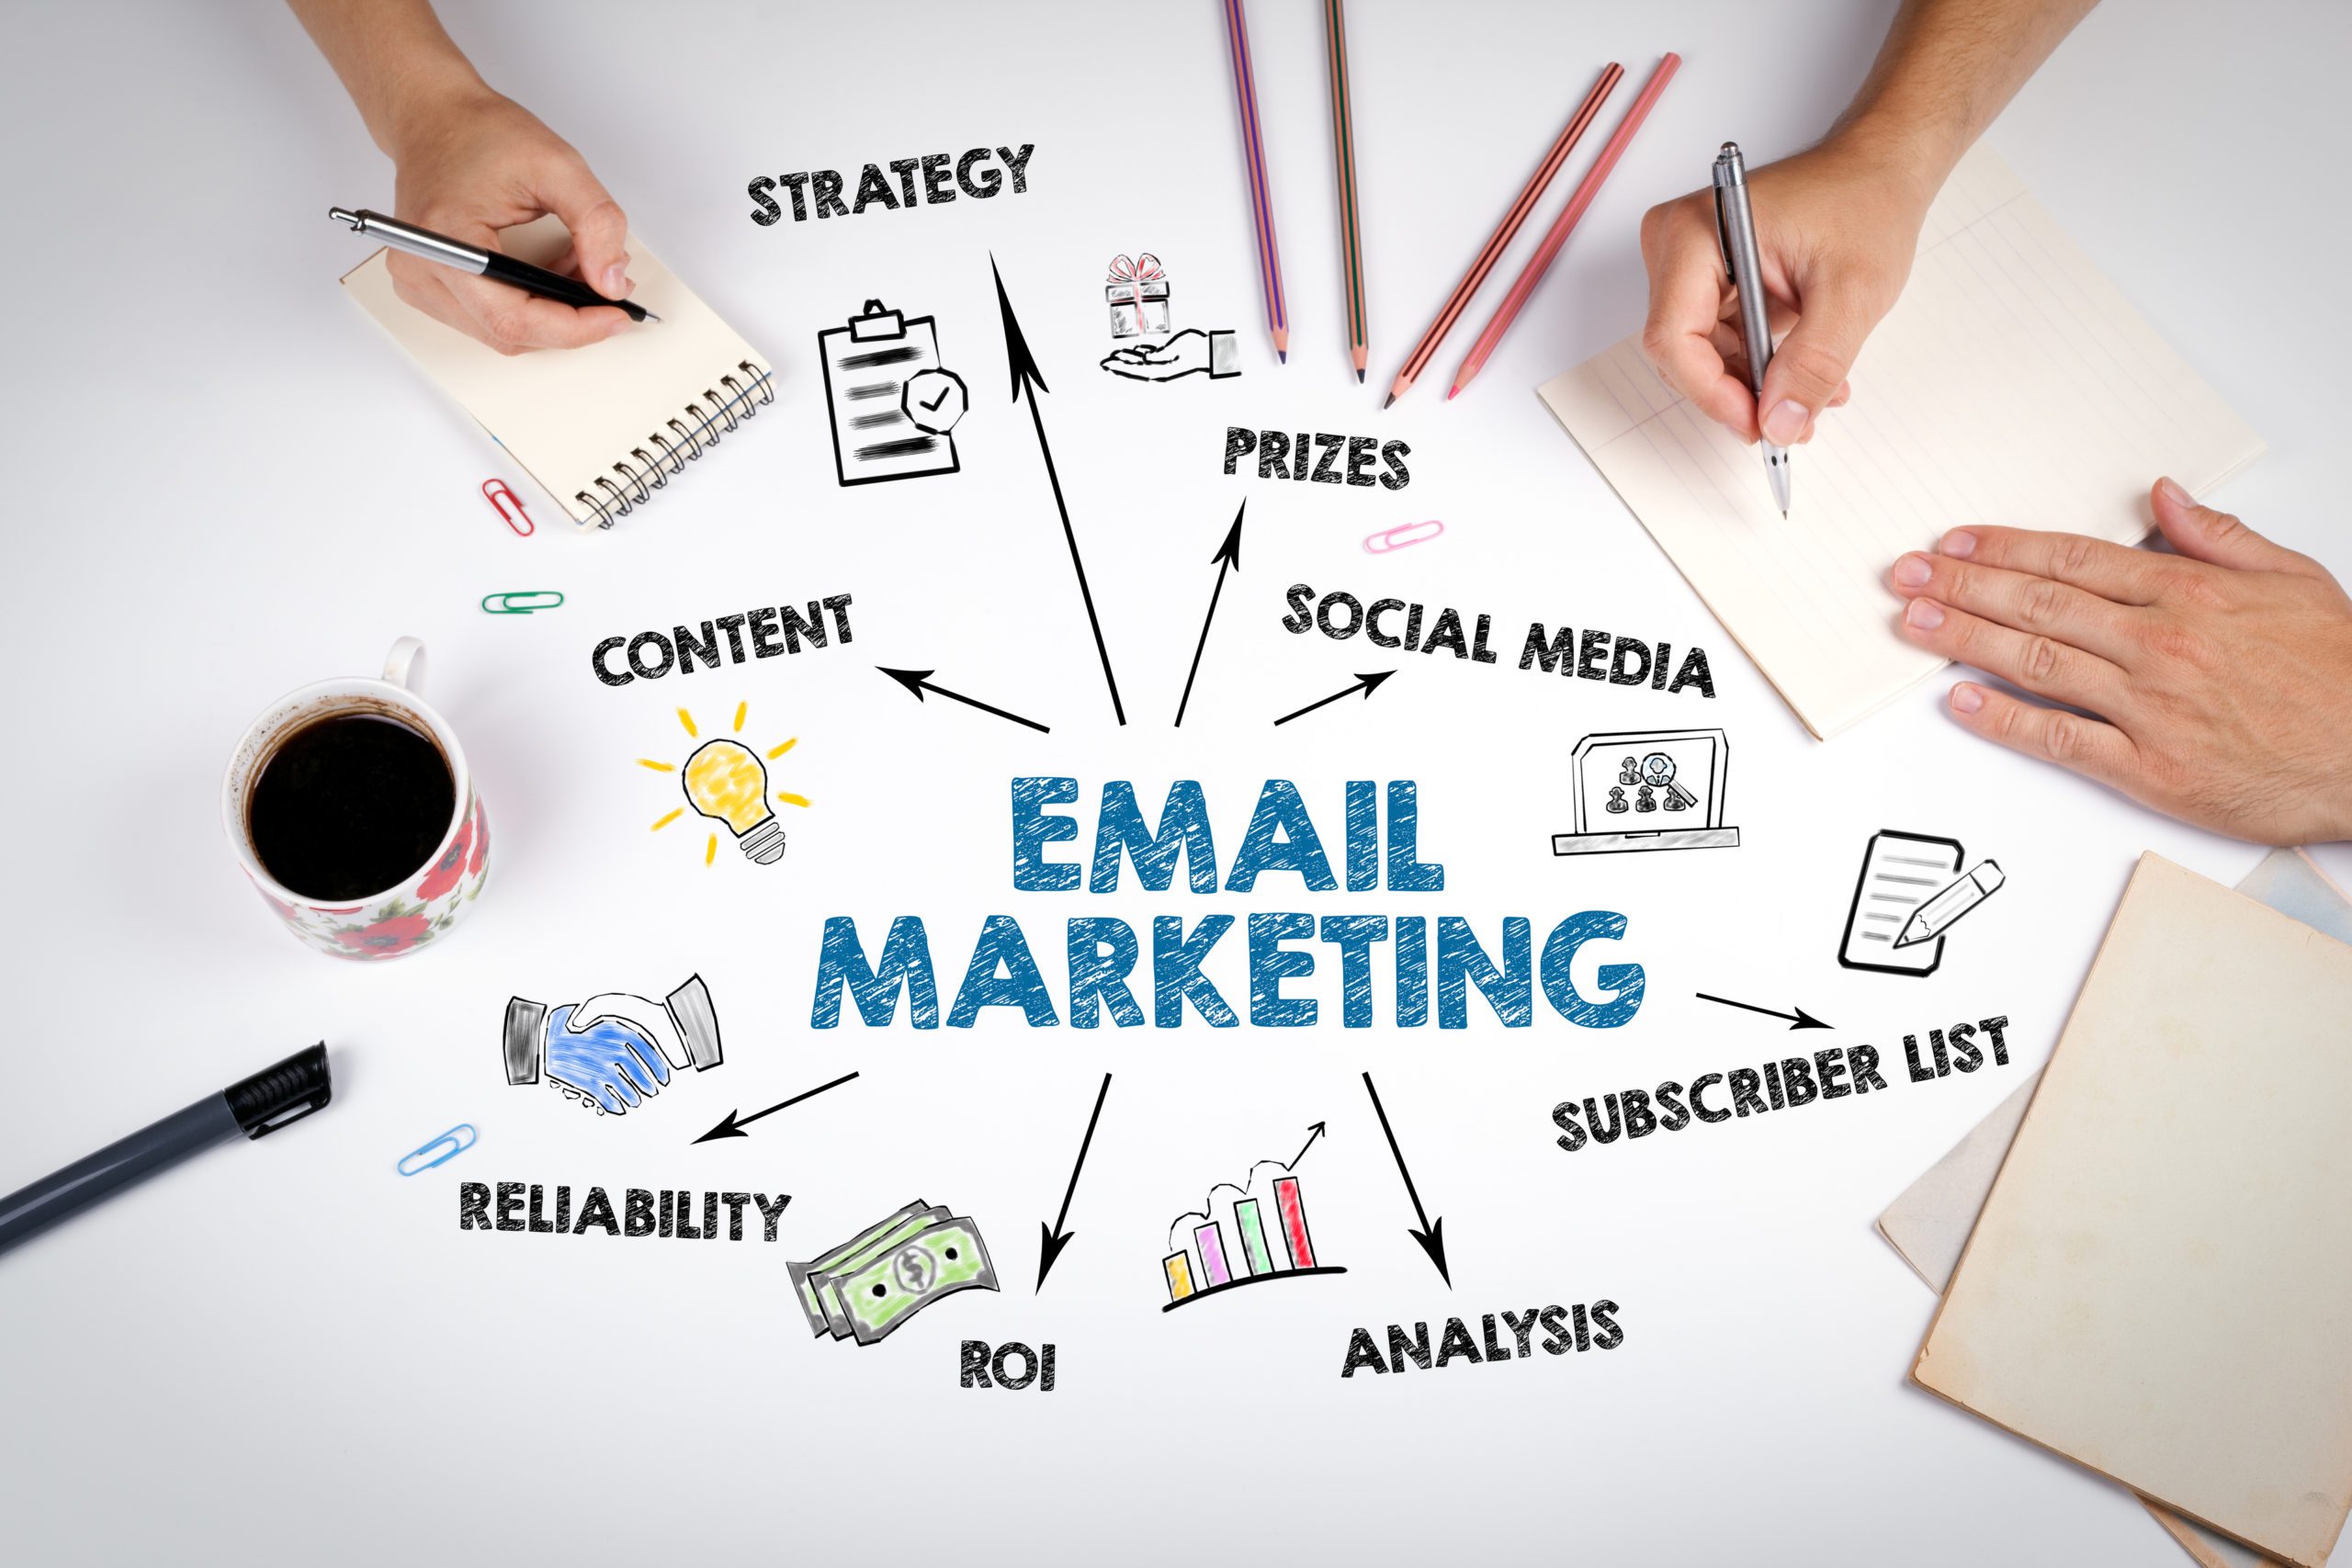 EMAIL MARKETING. Cntent, Social Media, Subscriber List and Analysis concept